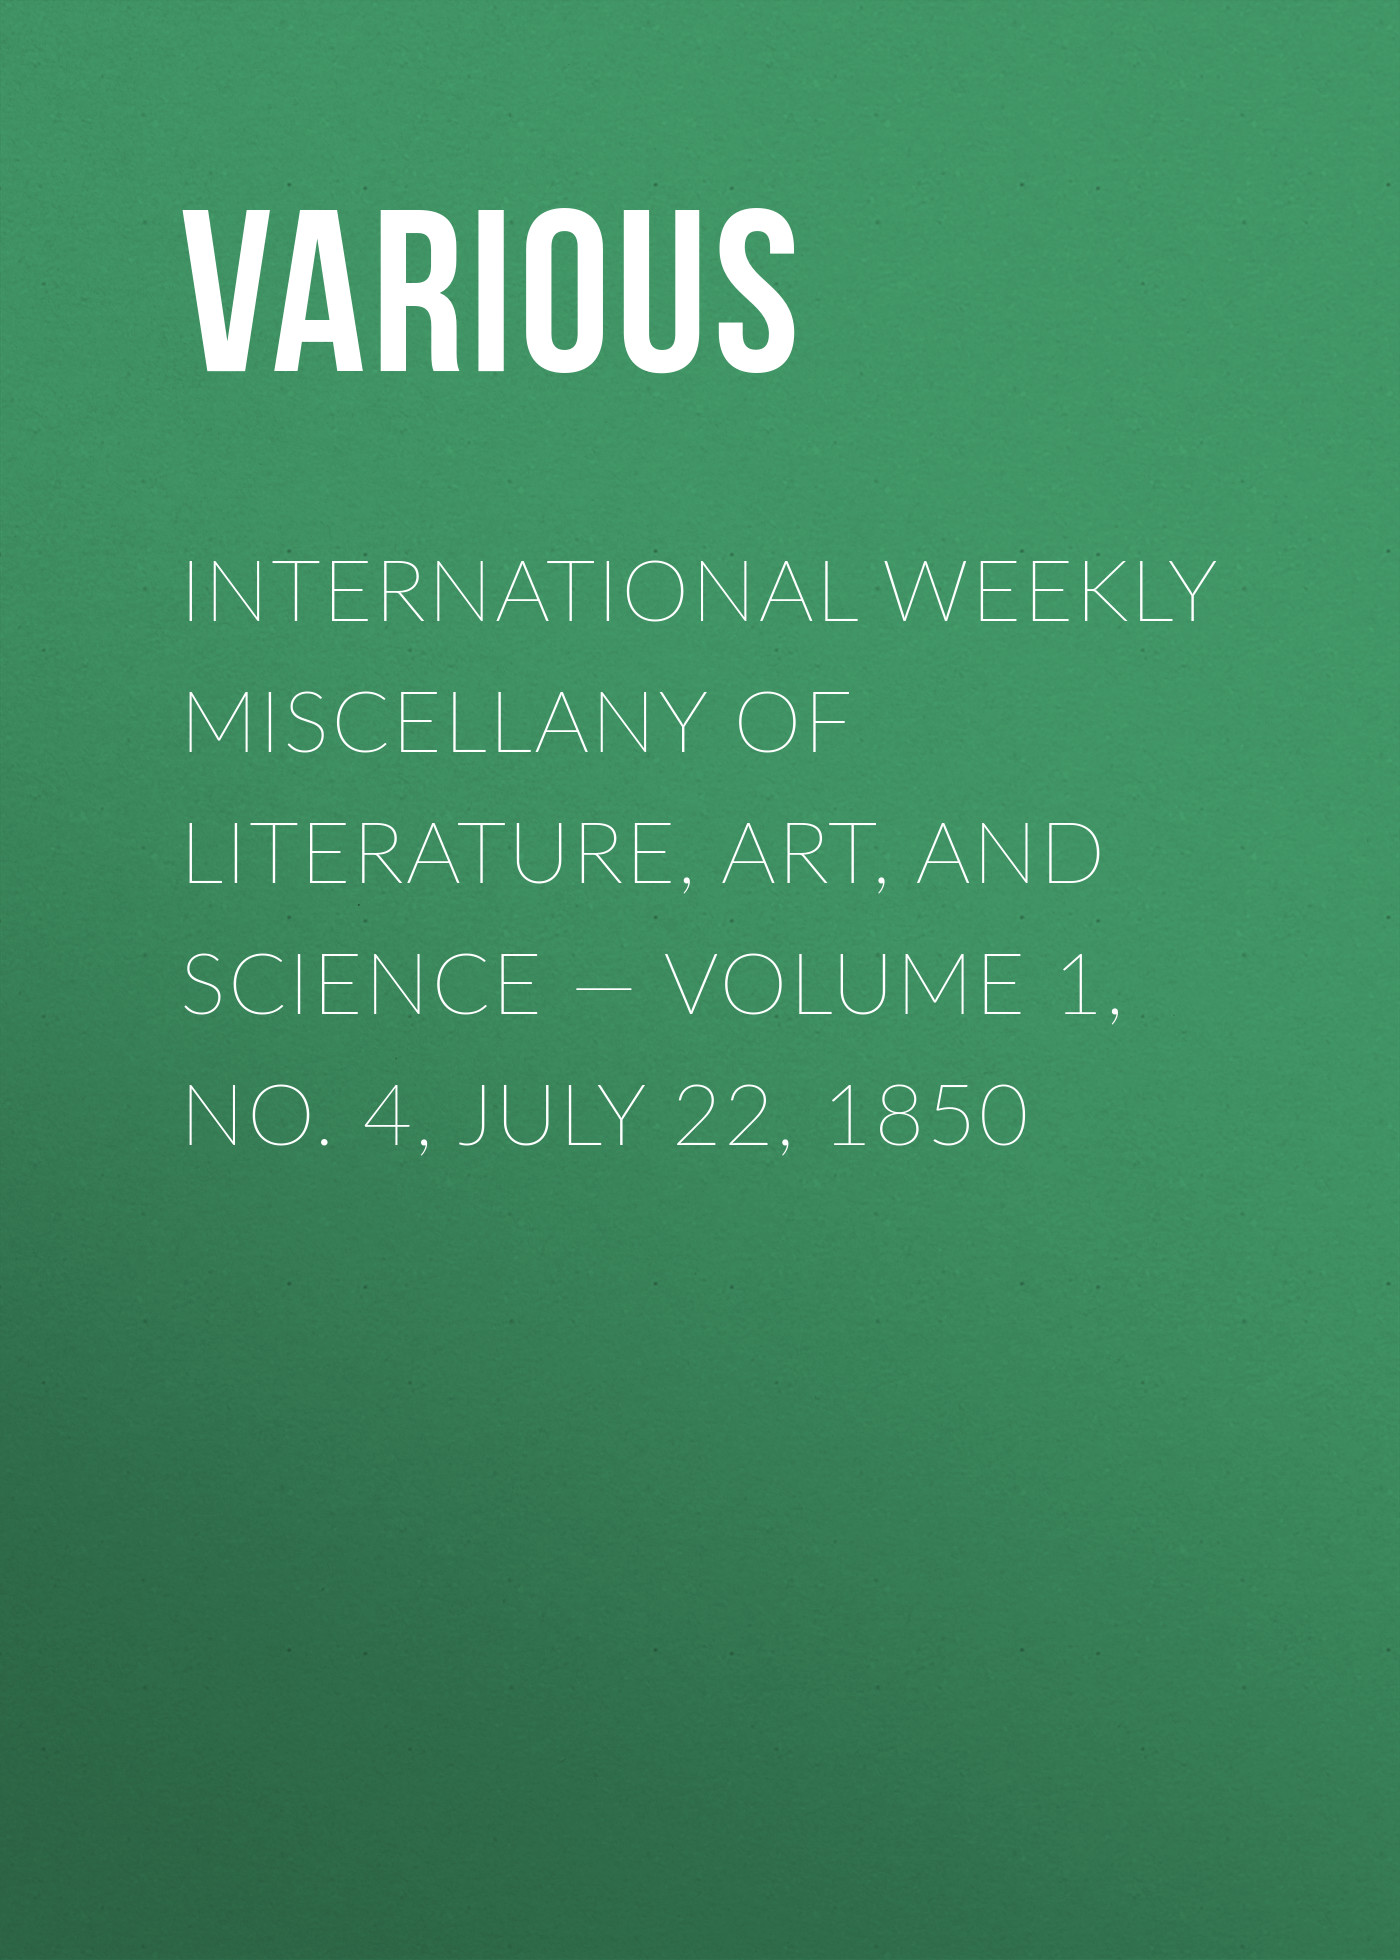 International Weekly Miscellany of Literature, Art, and Science— Volume 1, No. 4, July 22, 1850